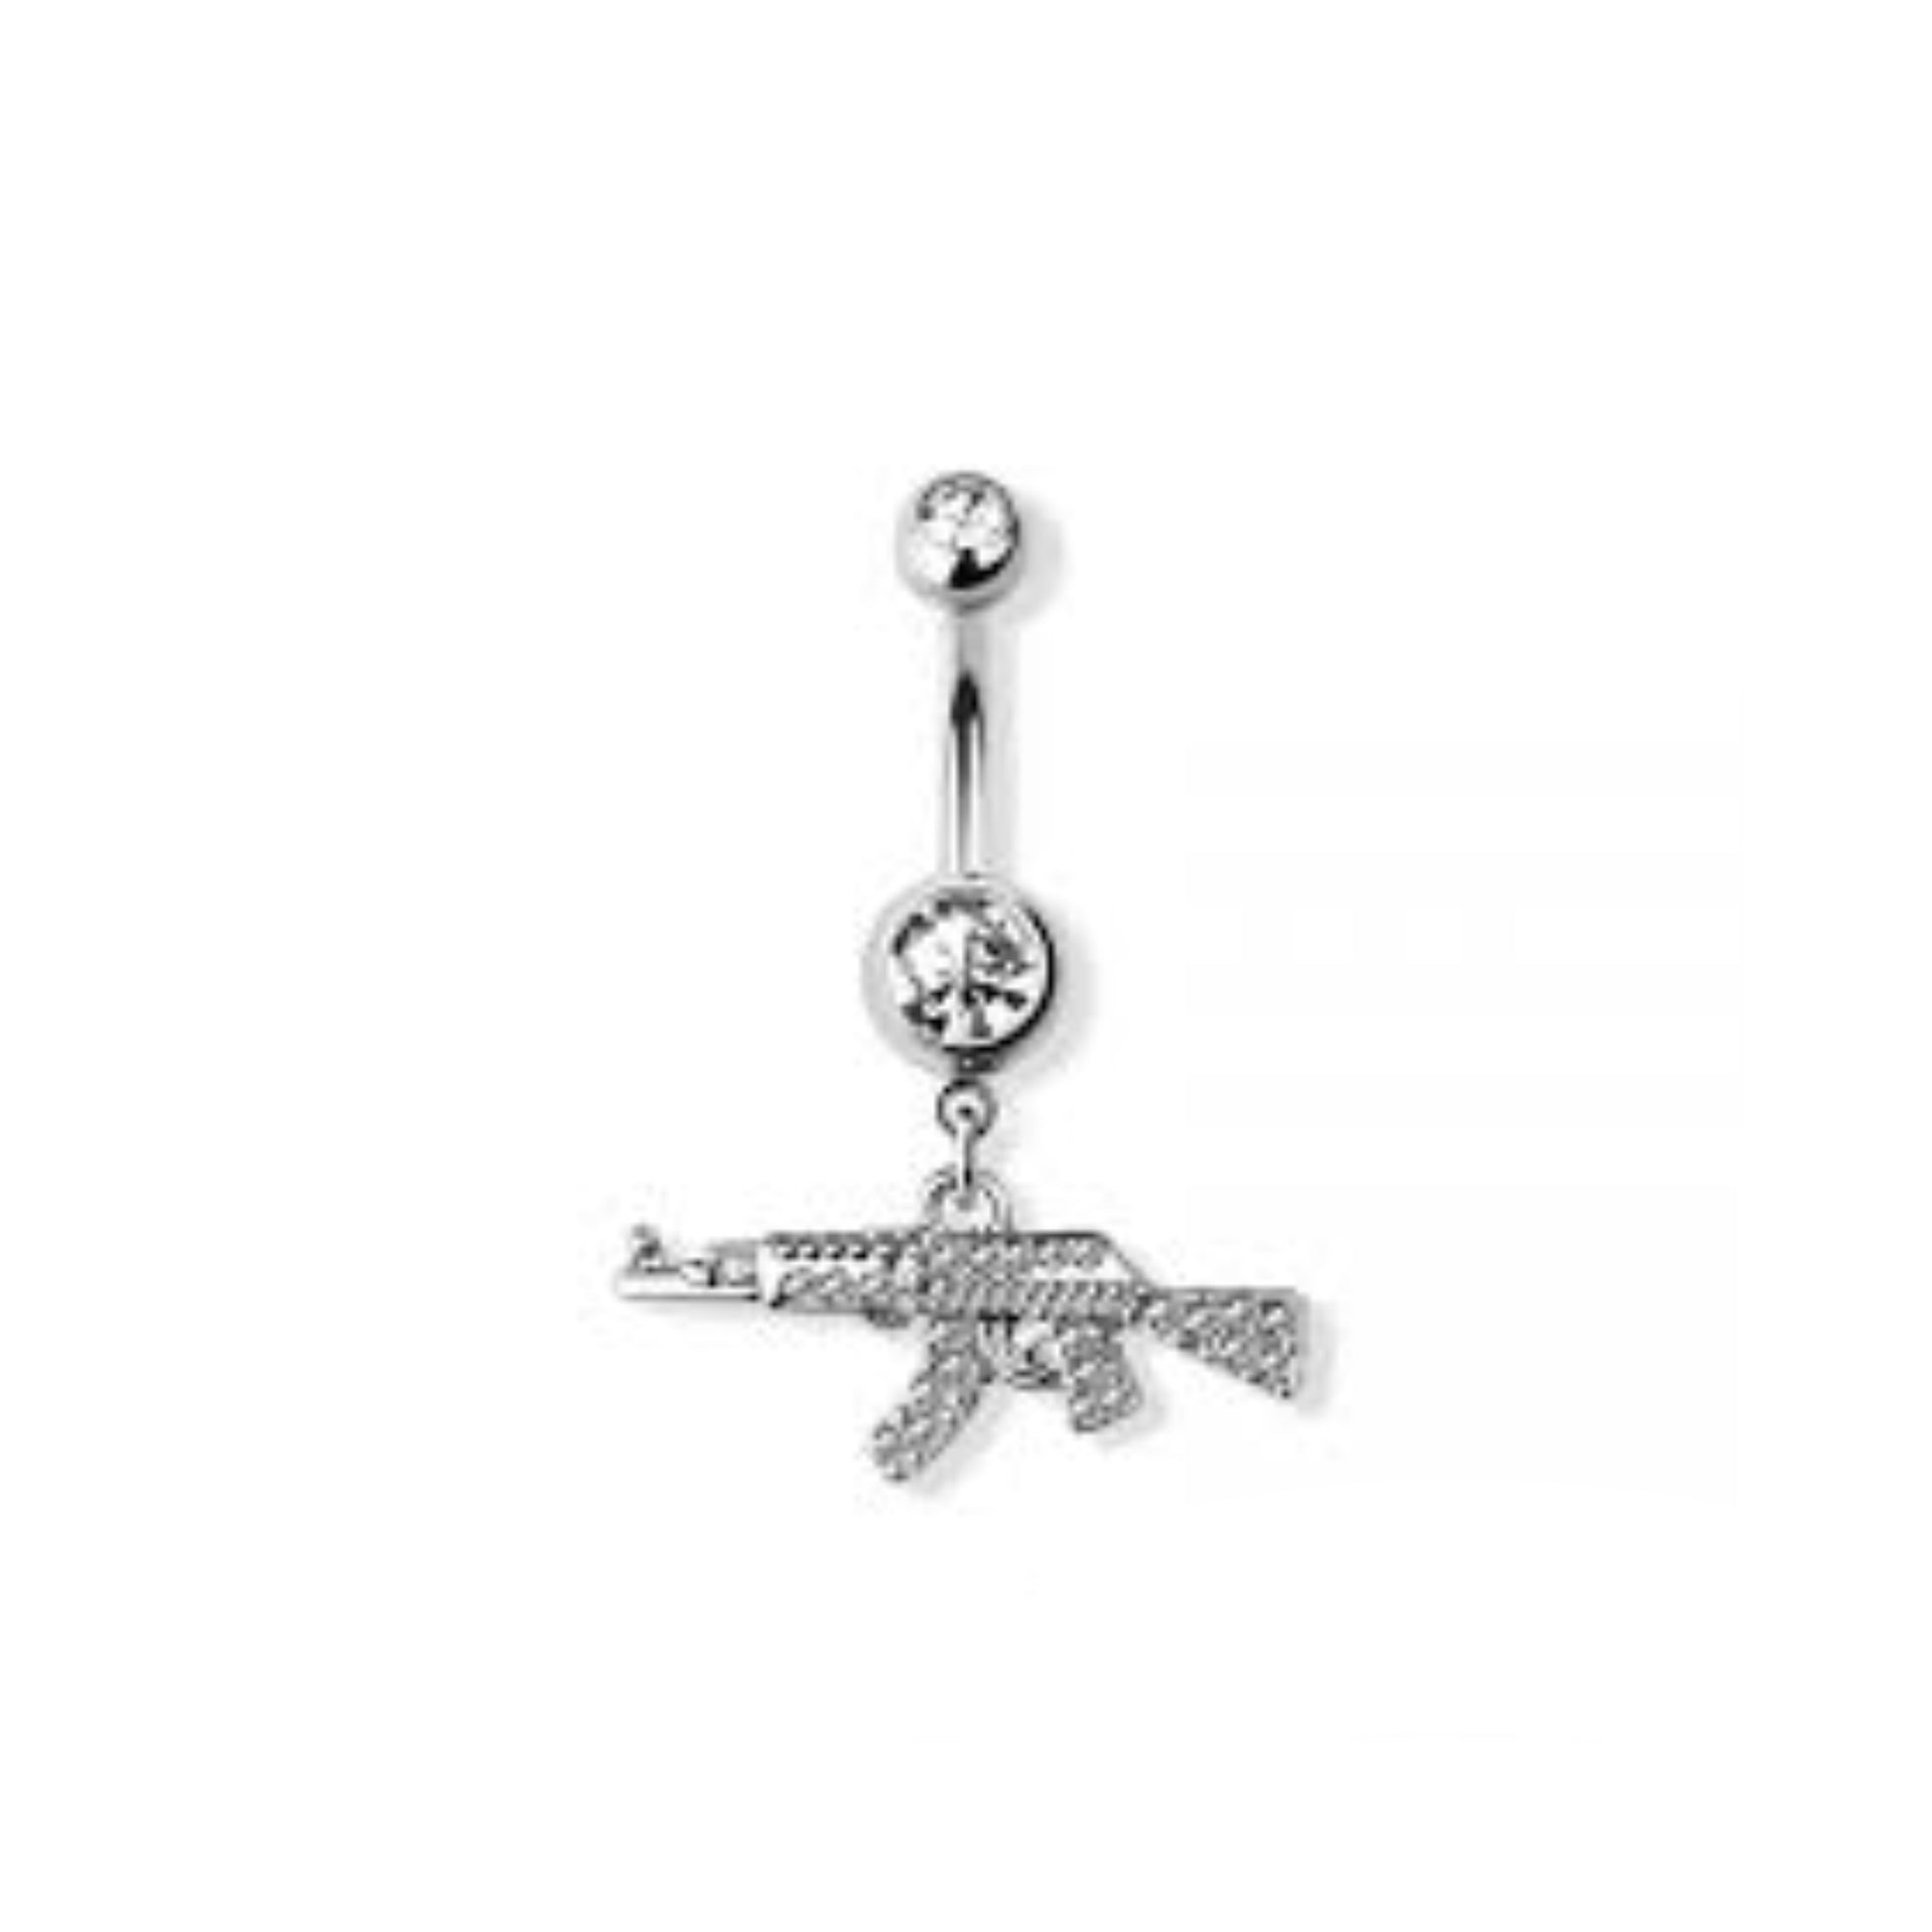 "Ak47 Belly Button Piercing made from 316L Stainless Steel and ASTM F-136 Titanium materials, featuring an externally threaded bar with a stainless steel gun charm, lead and nickel free"